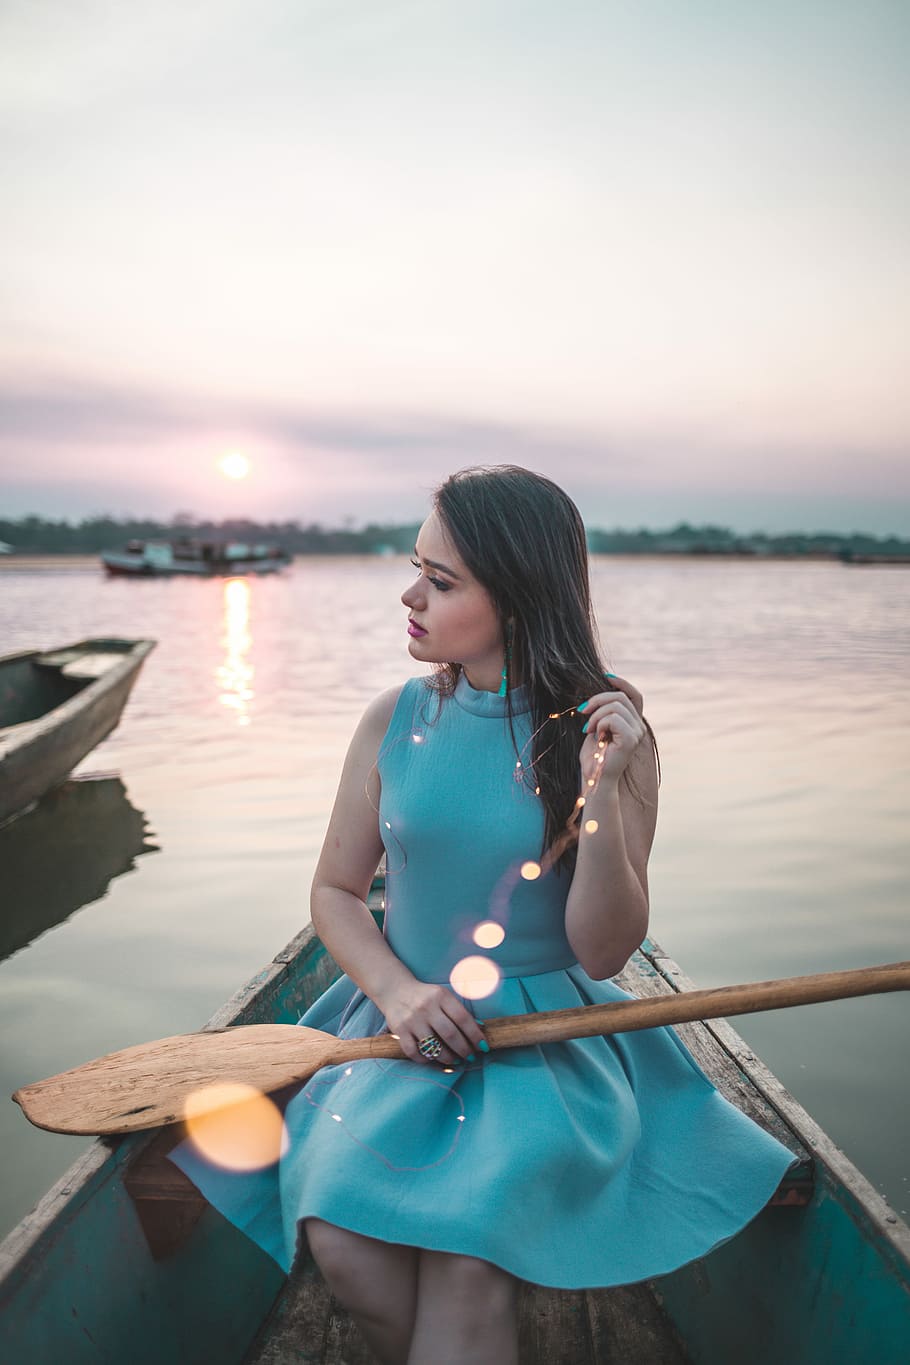 woman sitting on boat holding paddle, woman sitting on blue boat while holding brown wooden paddle on lap